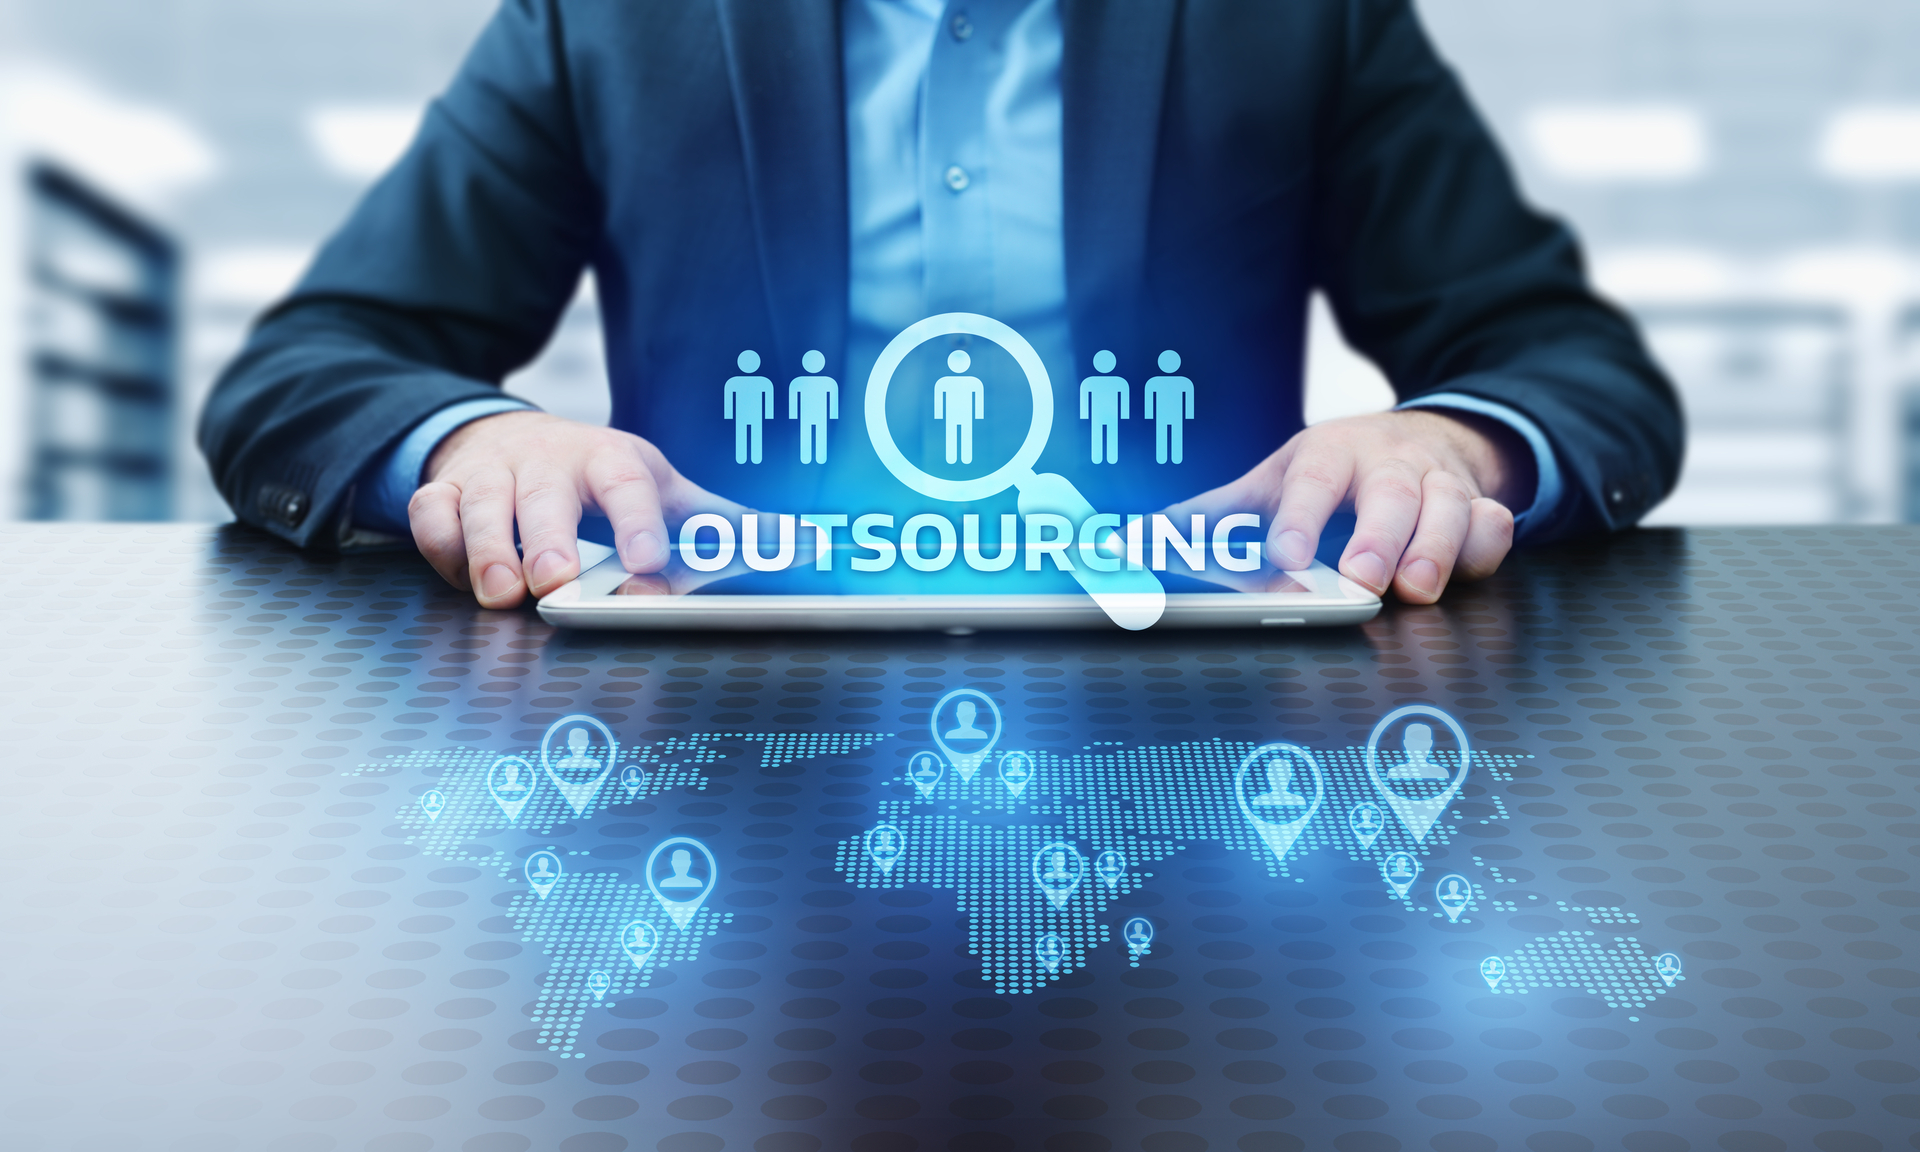 Singapore IT outsourcing services